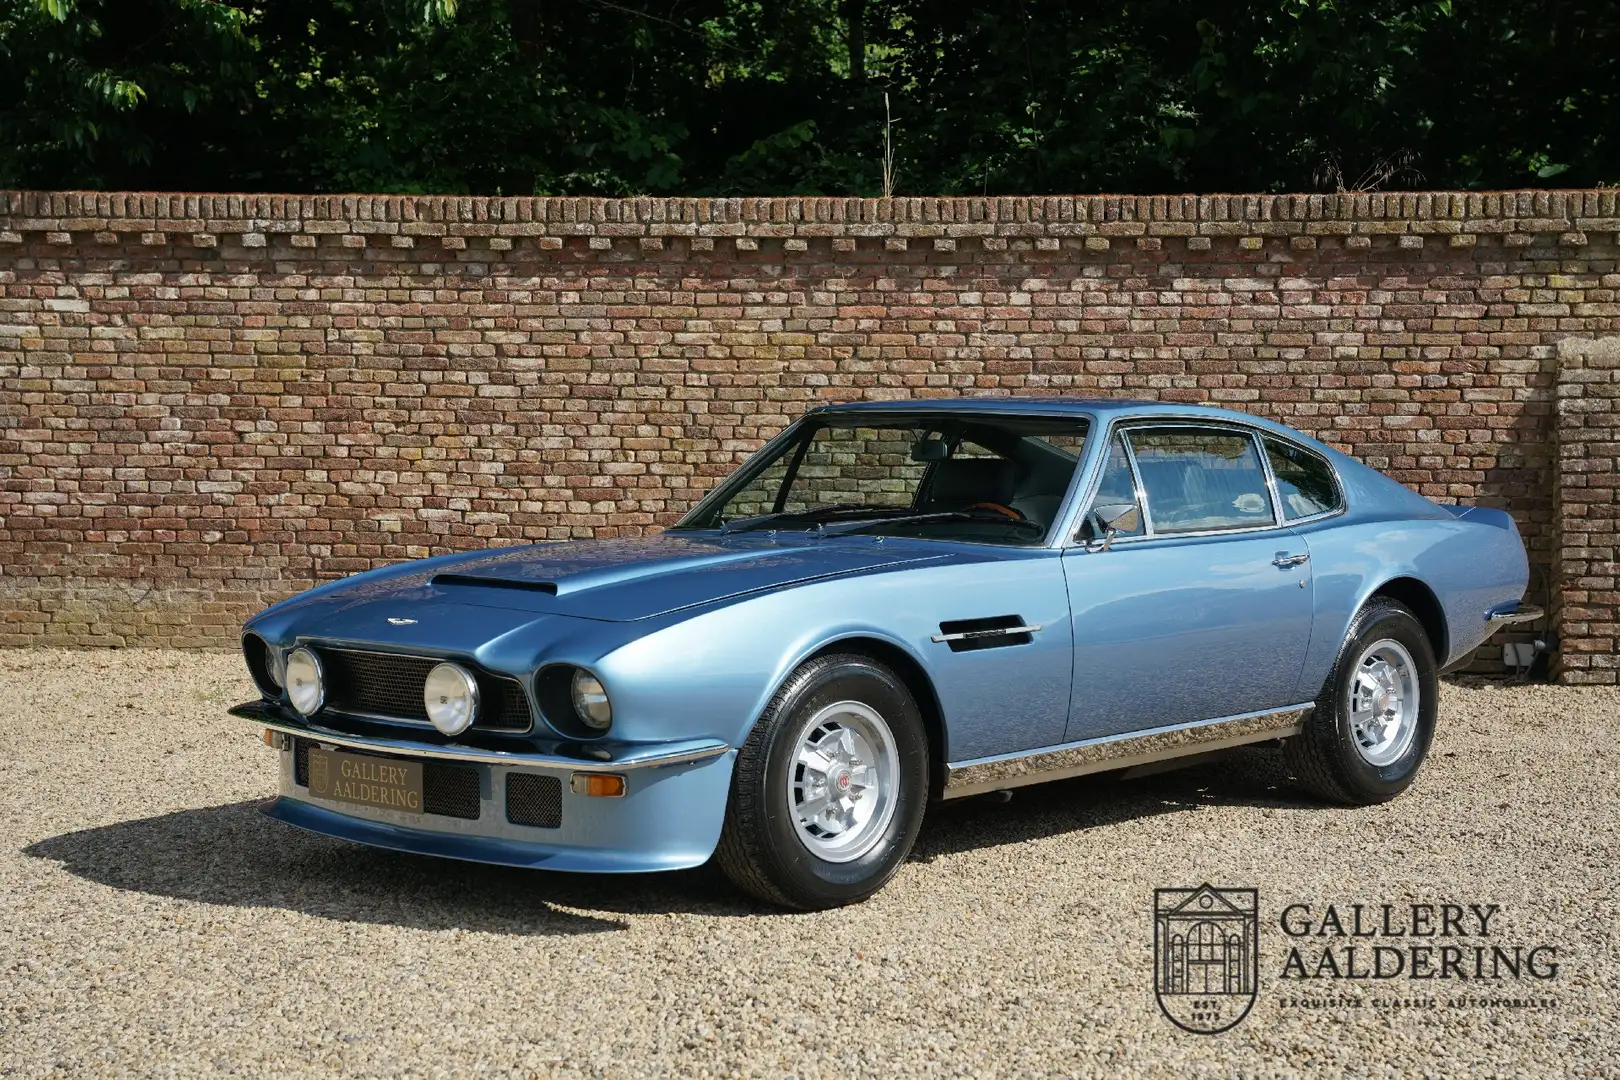 Aston Martin DBS Rare and sought after manual gearbox version with Blau - 1